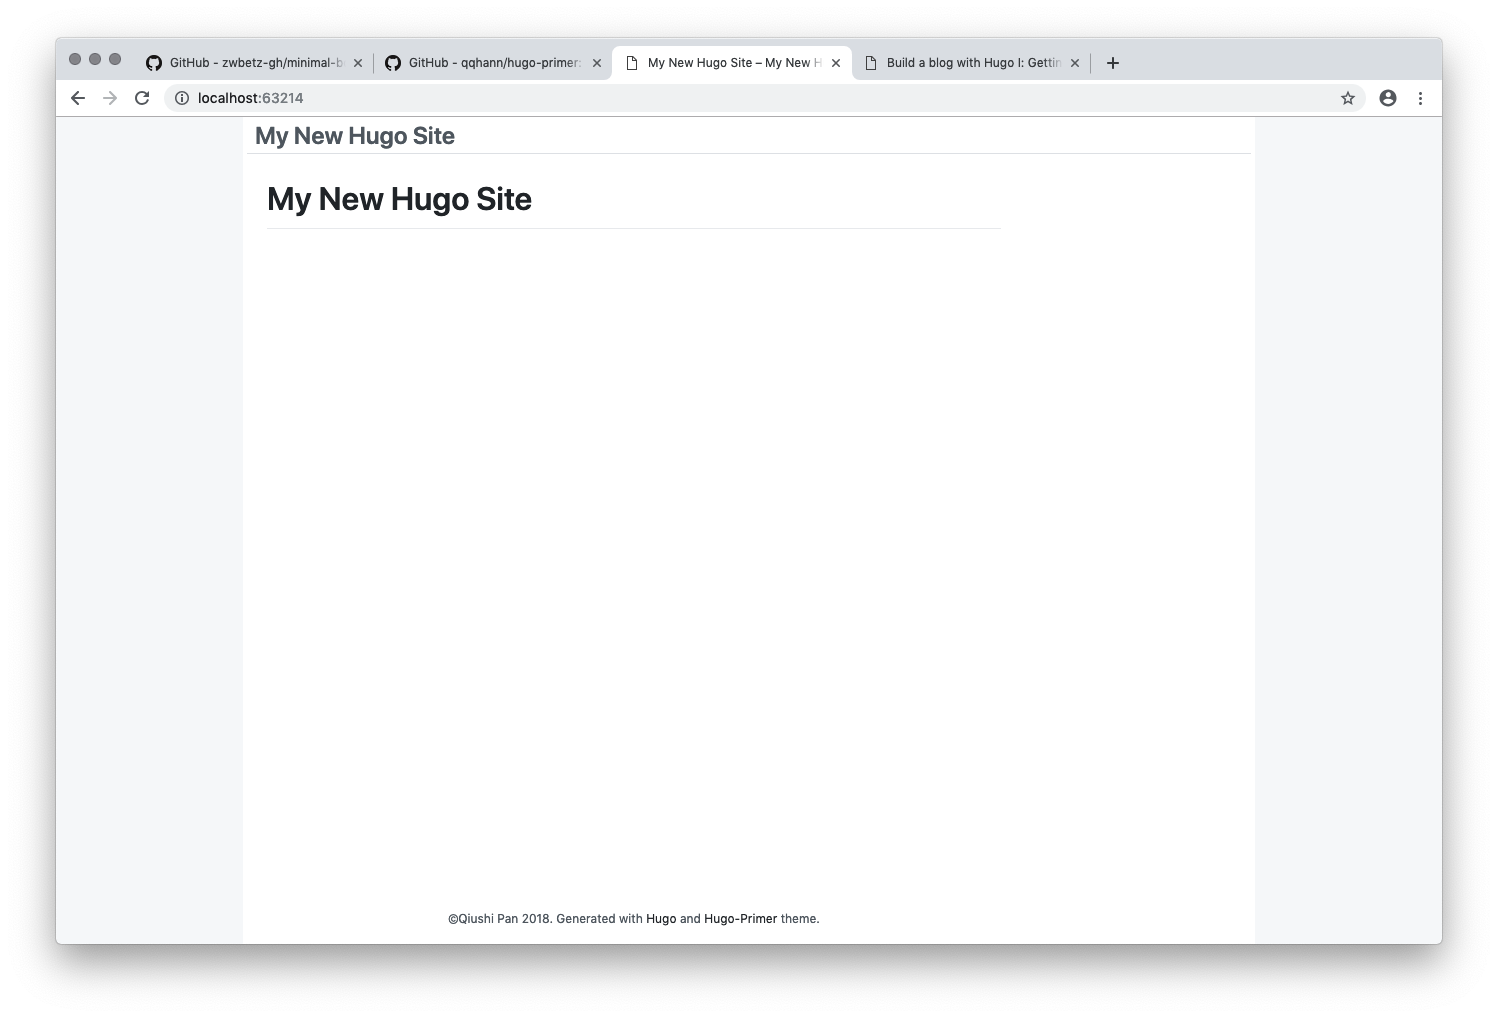 Hugo w/ hugo-primer theme but without any content